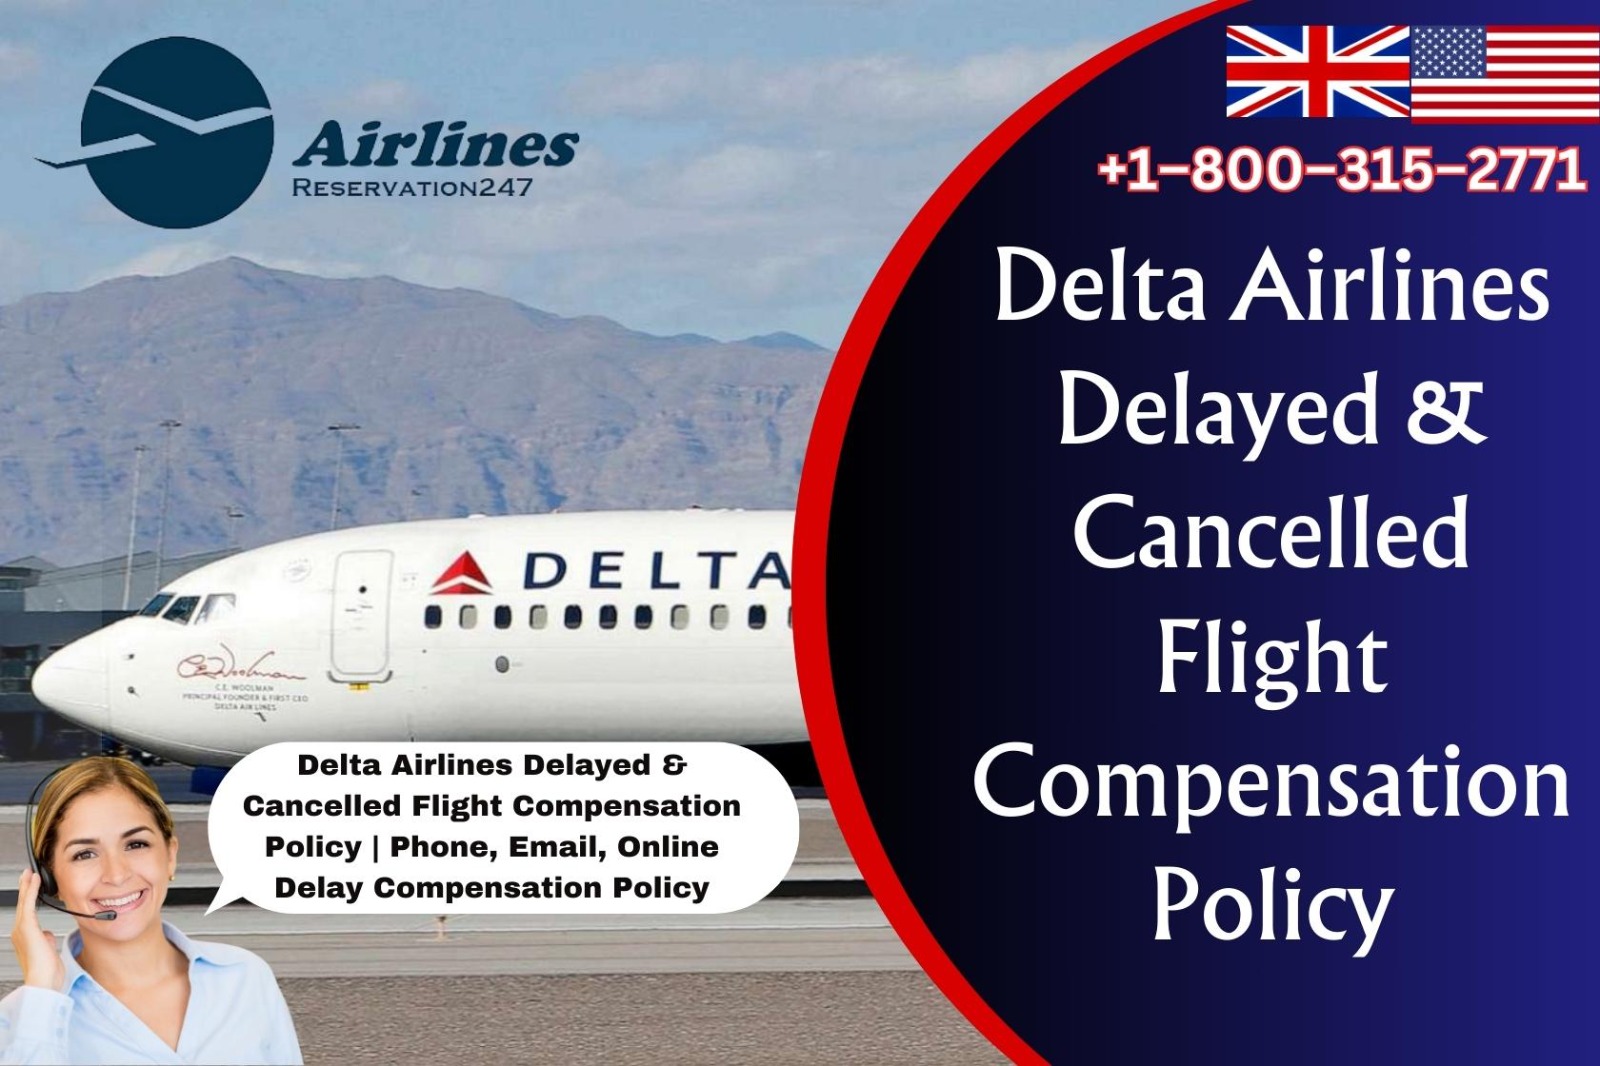 Delta Airlines Delayed Flight Compensation Policy | Claim Refunds